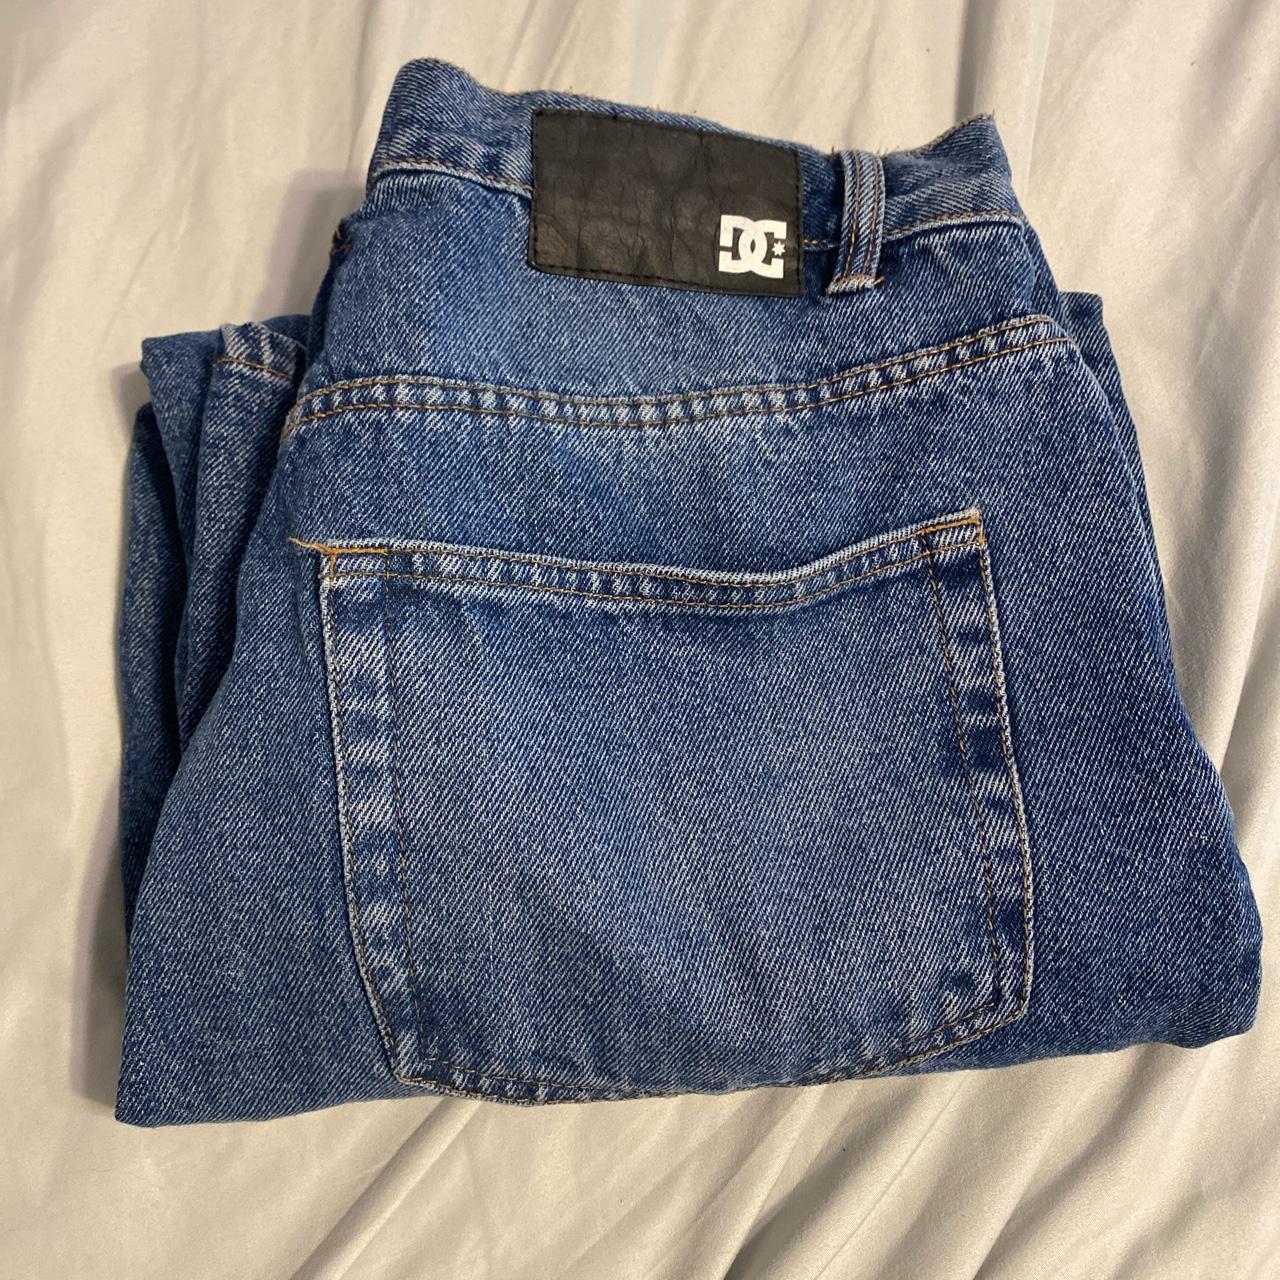 DC Shoes Women's Navy and Blue Jeans